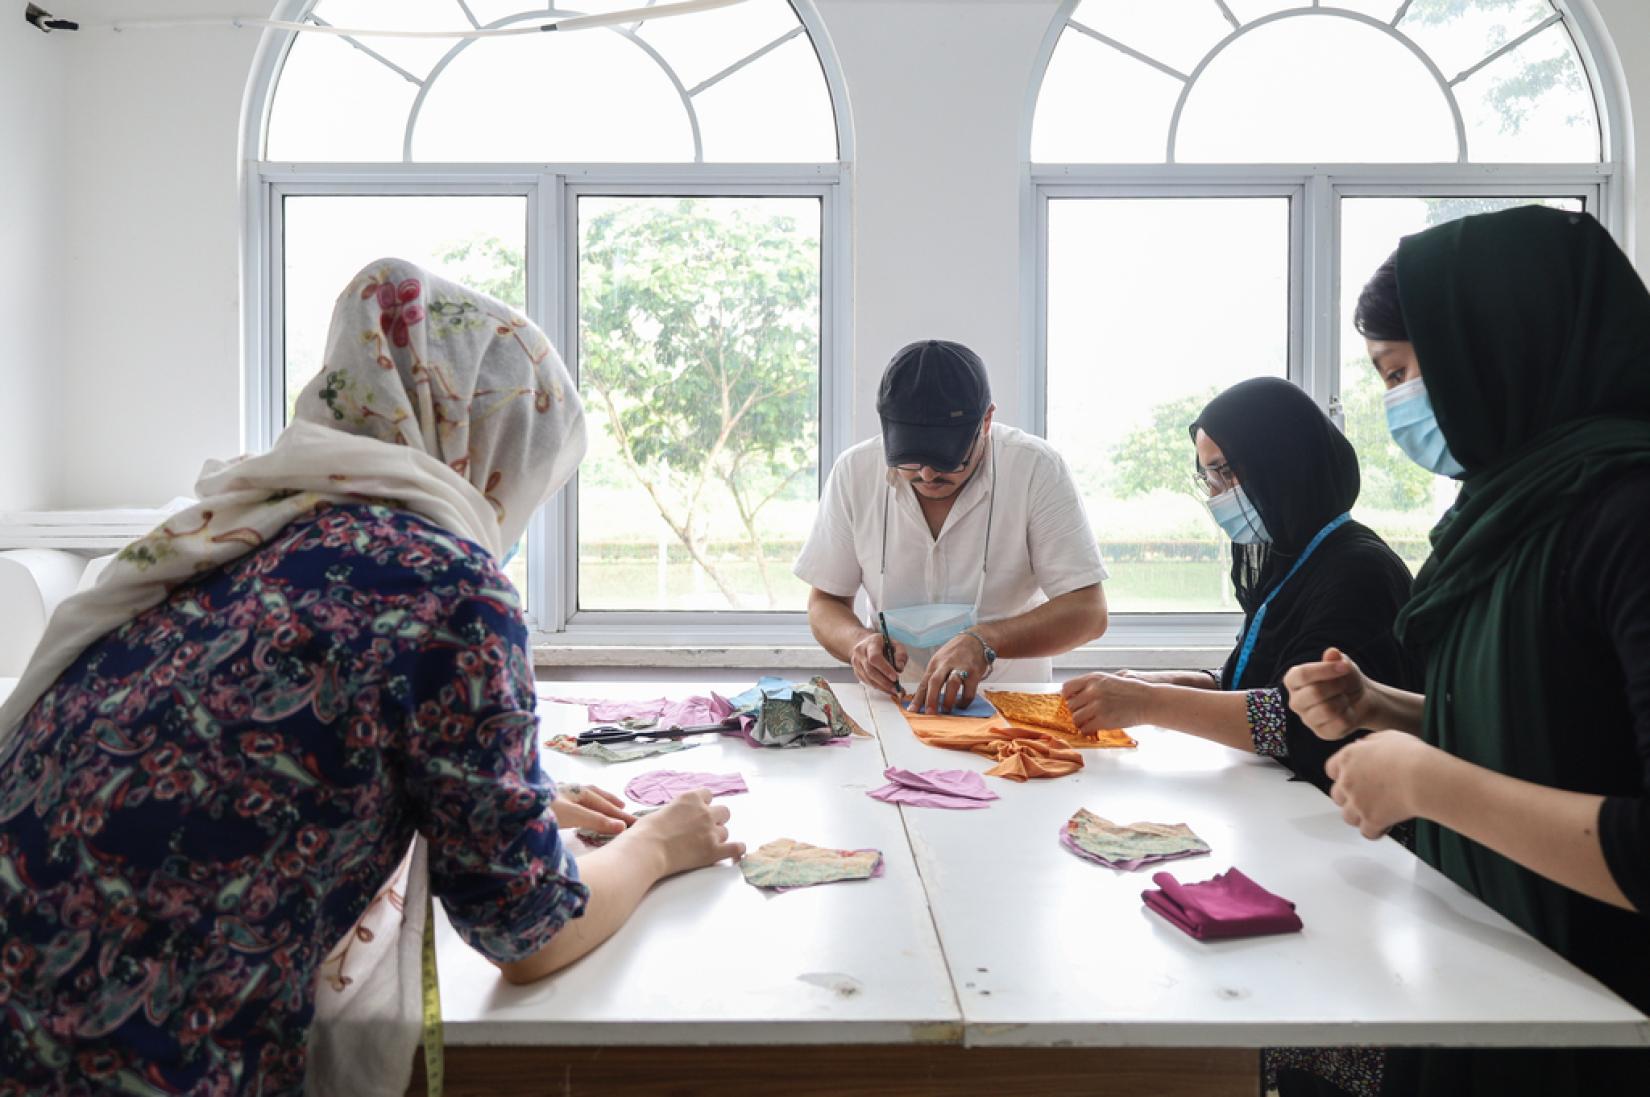 Three women and one man are learning handicraft in a classroom